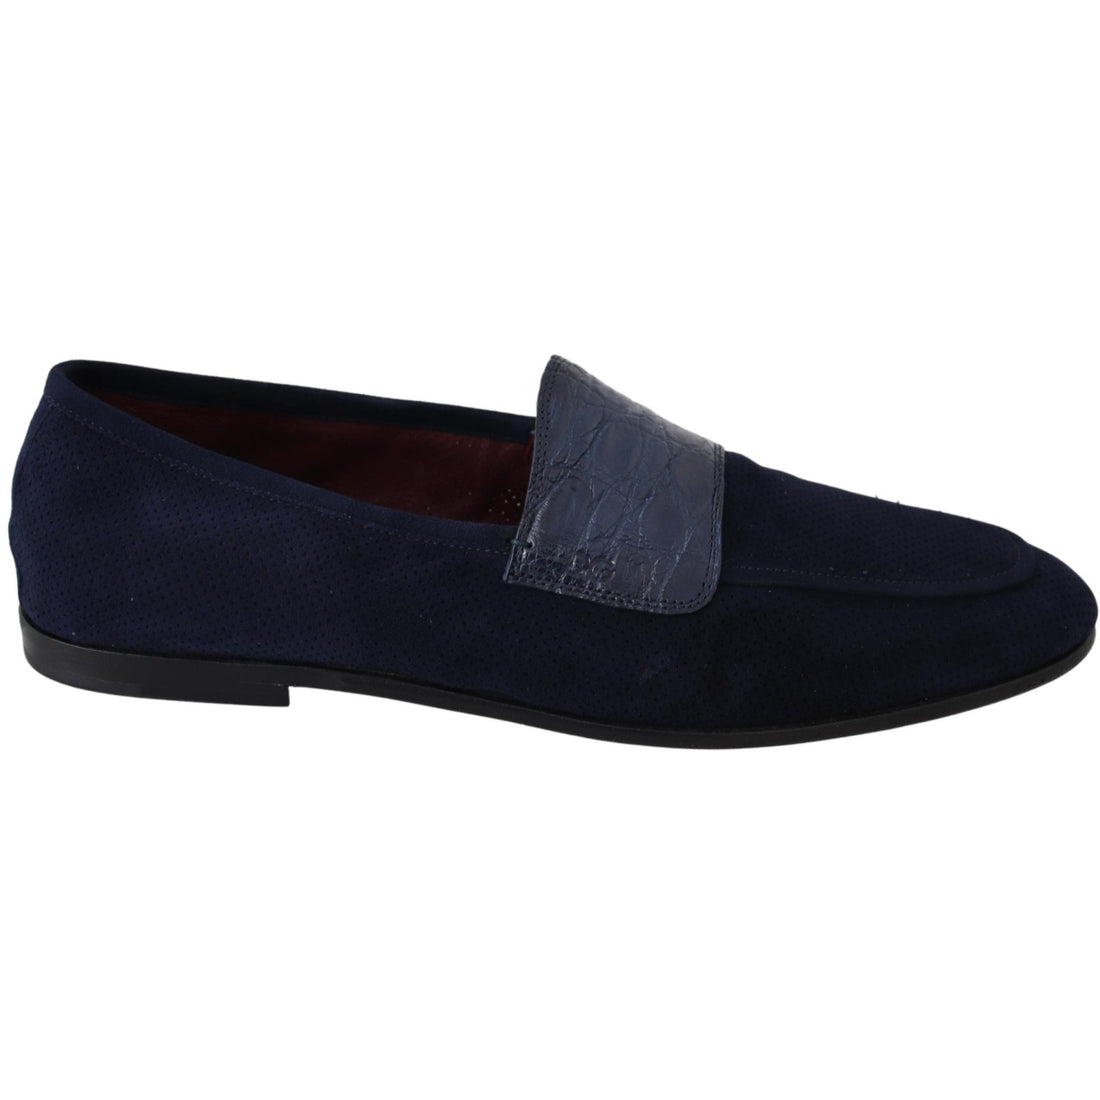 Dolce & Gabbana Blue Suede Caiman Loafers Slippers Shoes - Paris Deluxe